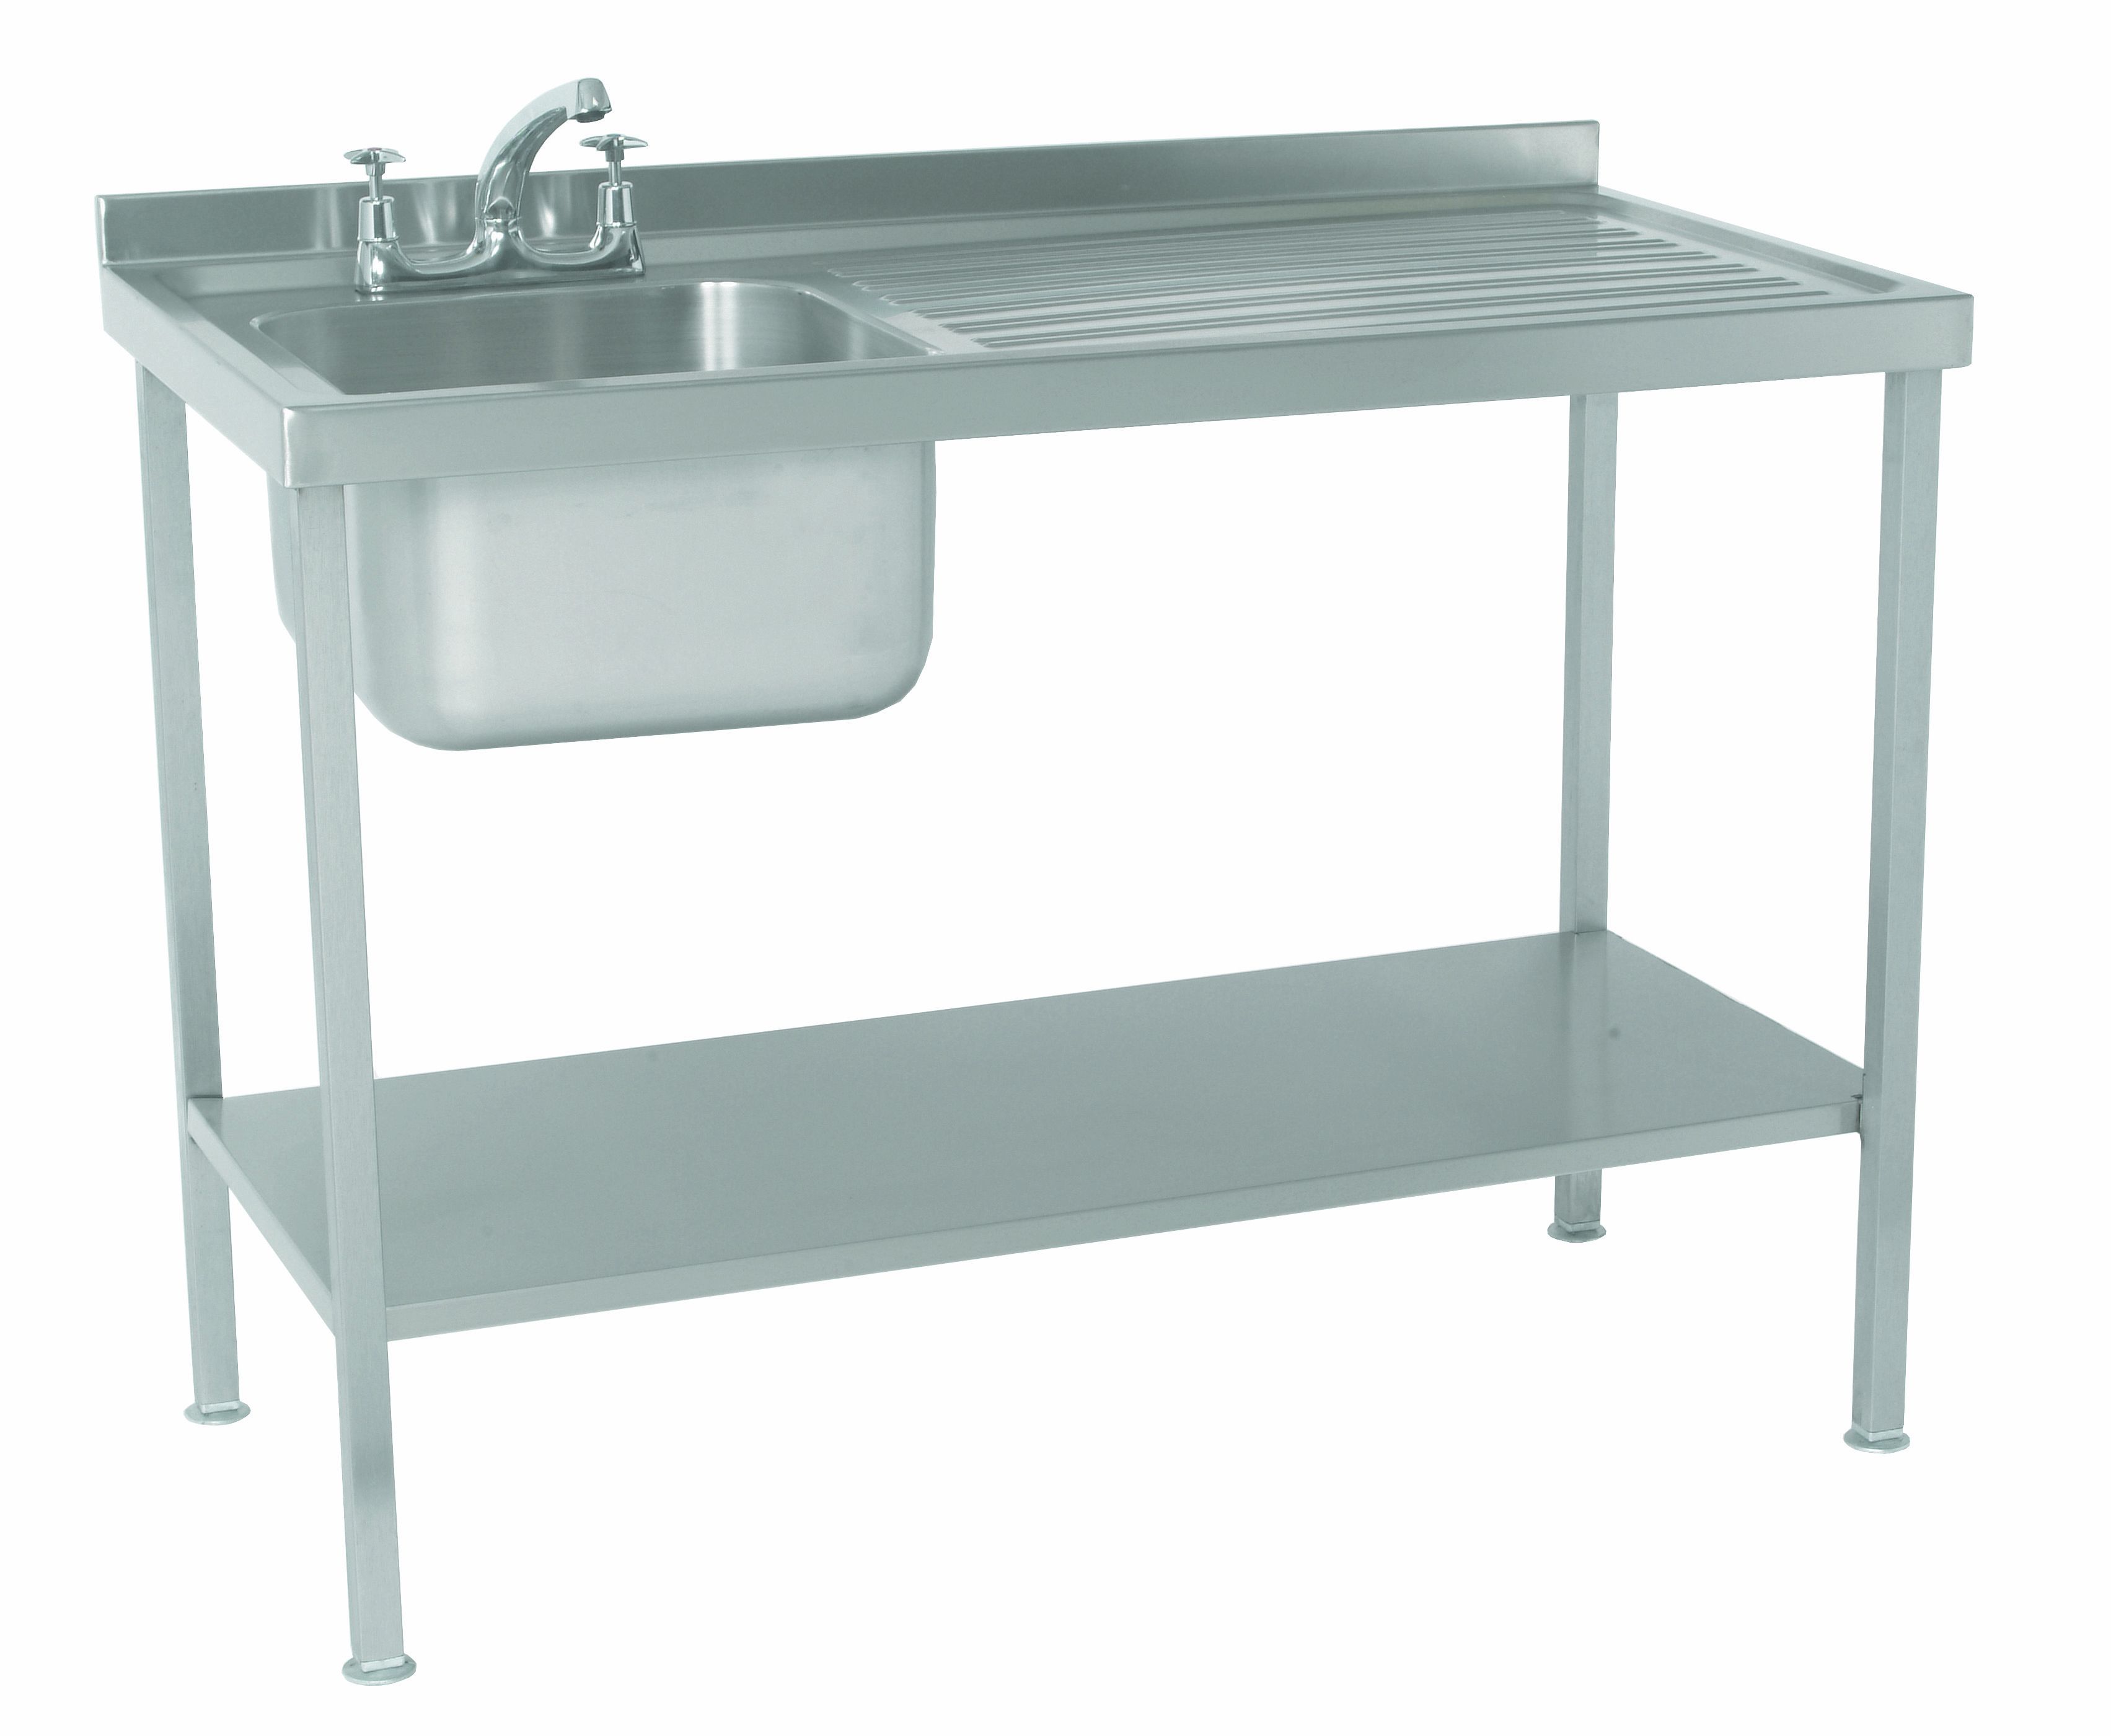 Parry SINKR - Stainless Steel Assembled Sink With Single Bowl And Single Drainer Right